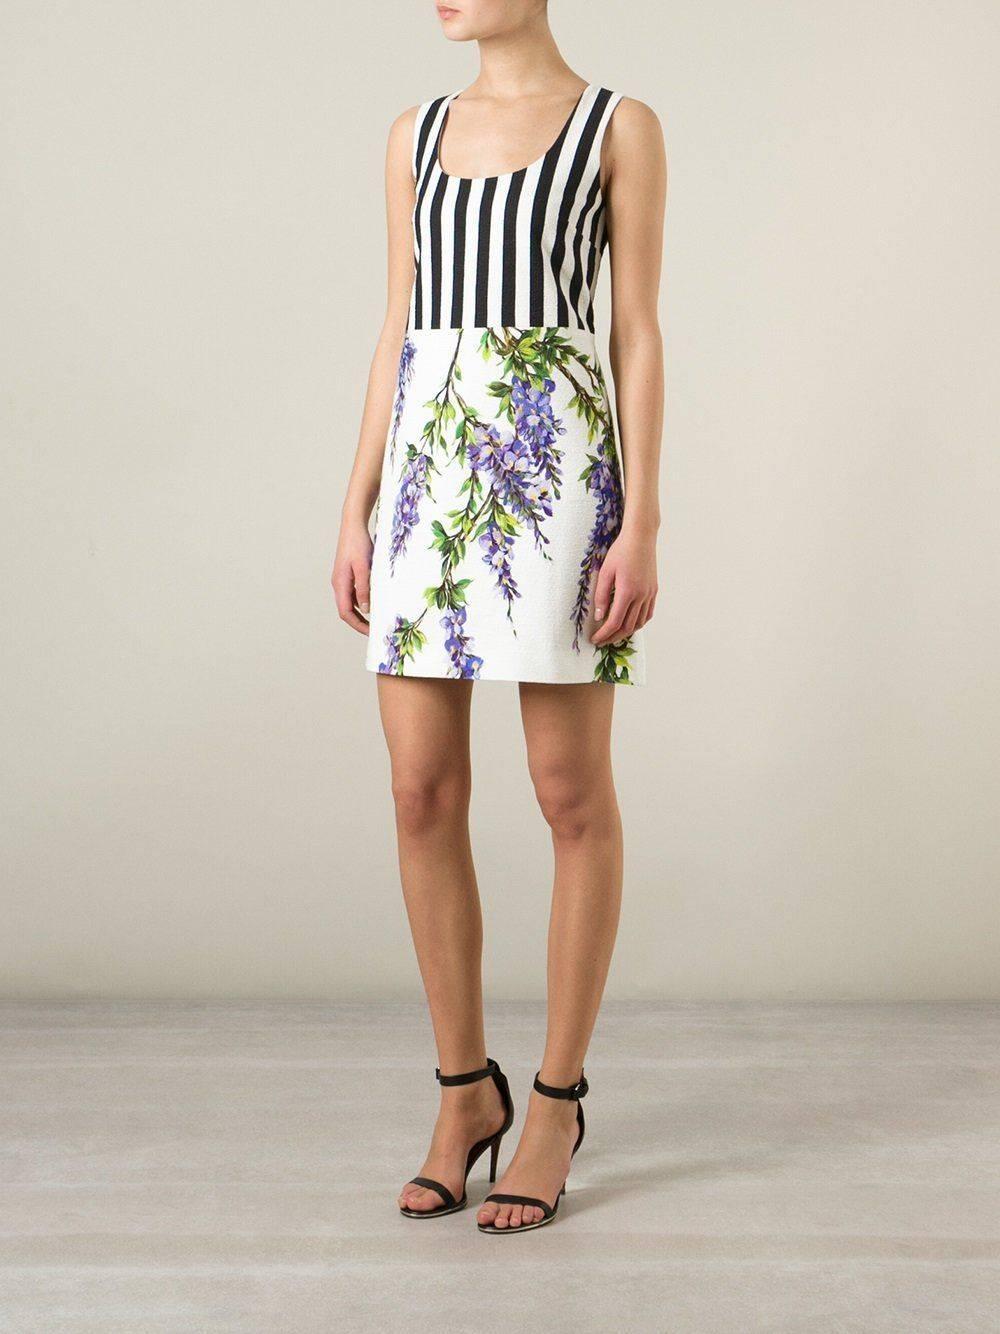 New Dolce and Gabbana White Striped Wisteria Floral Mini Dress 40 UK 8  
Black, white and purple silk and stretch cotton blend striped wisteria print dress from Dolce & Gabbana featuring a scoop neck, a sleeveless design and a rear zip fastening. A